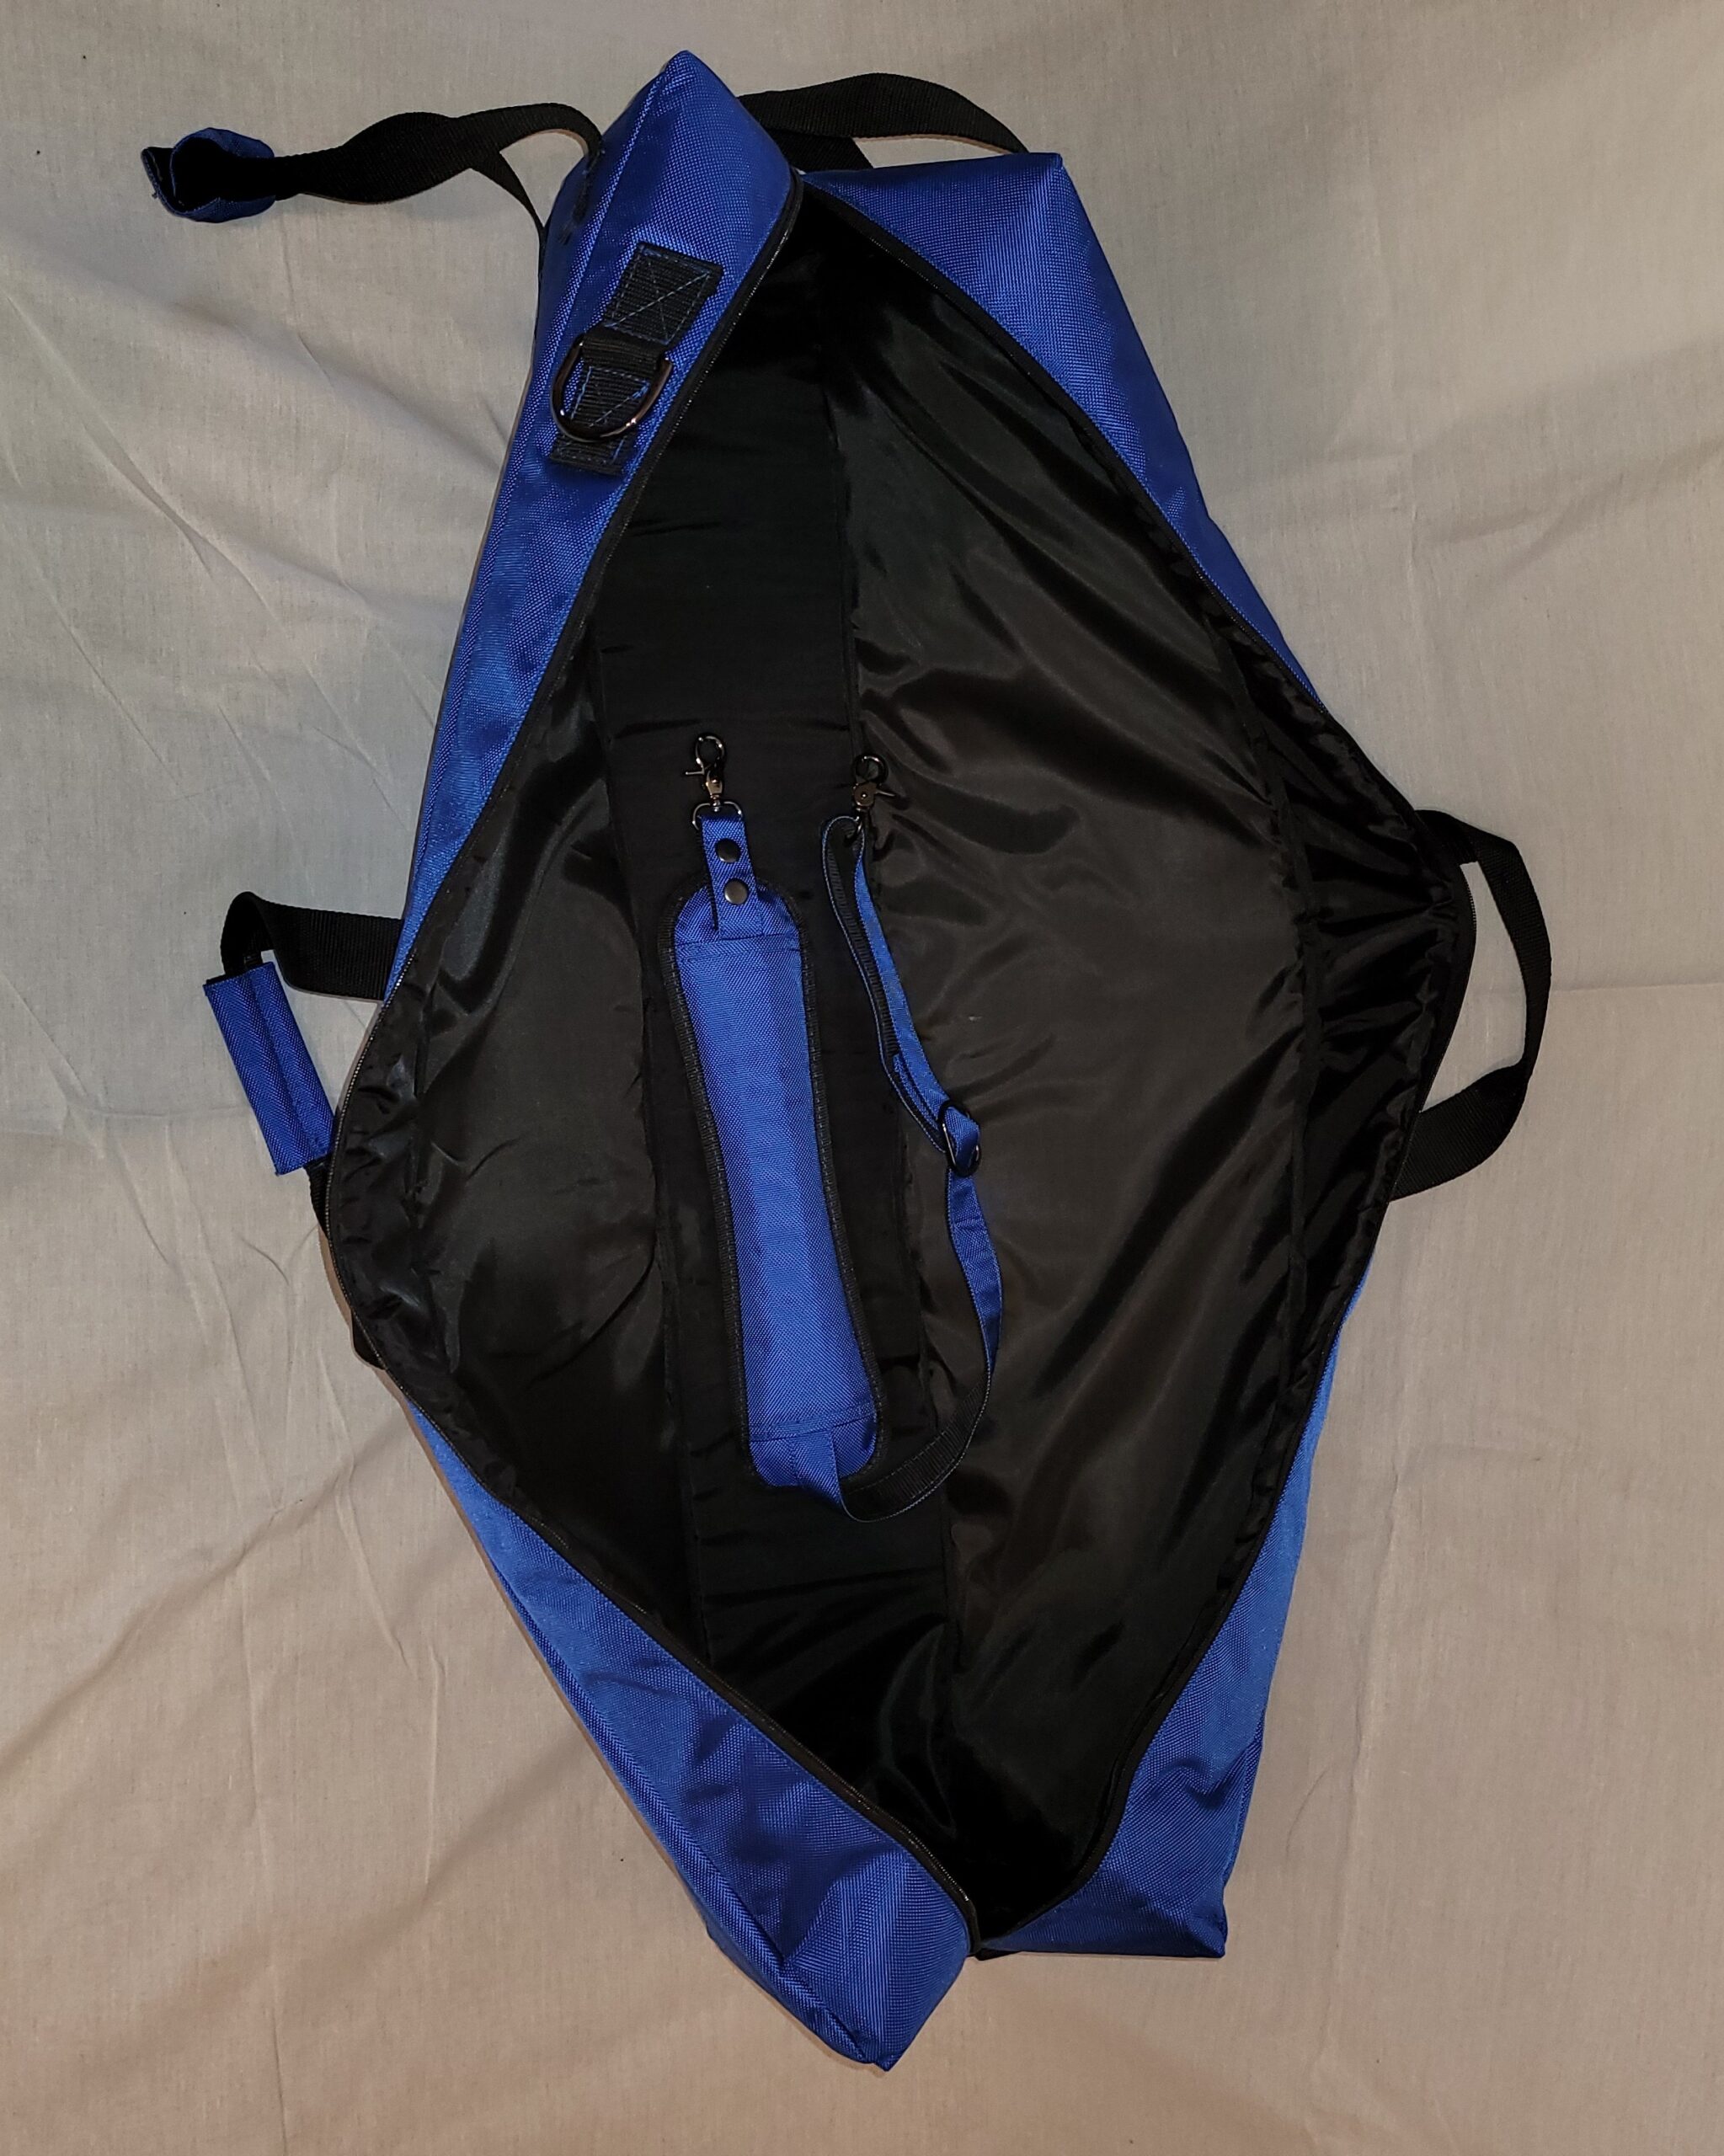 Blue padded carrying case with shoulder strap